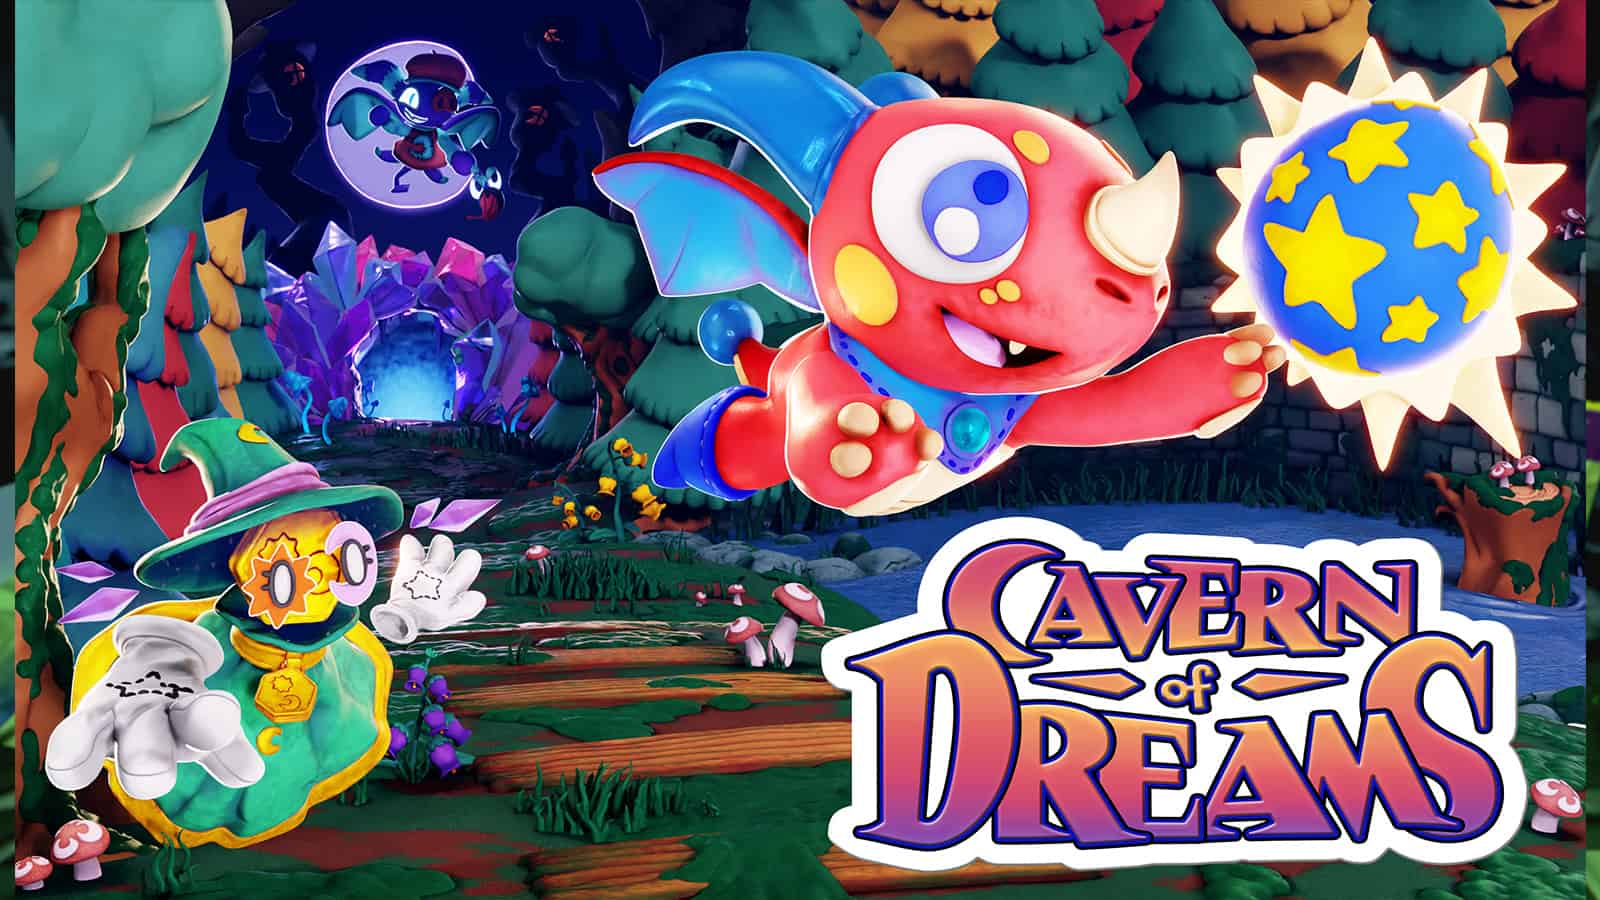 Cavern Of Dreams Is A Retro-Inspired Platformer Coming To Nintendo Switch This Month